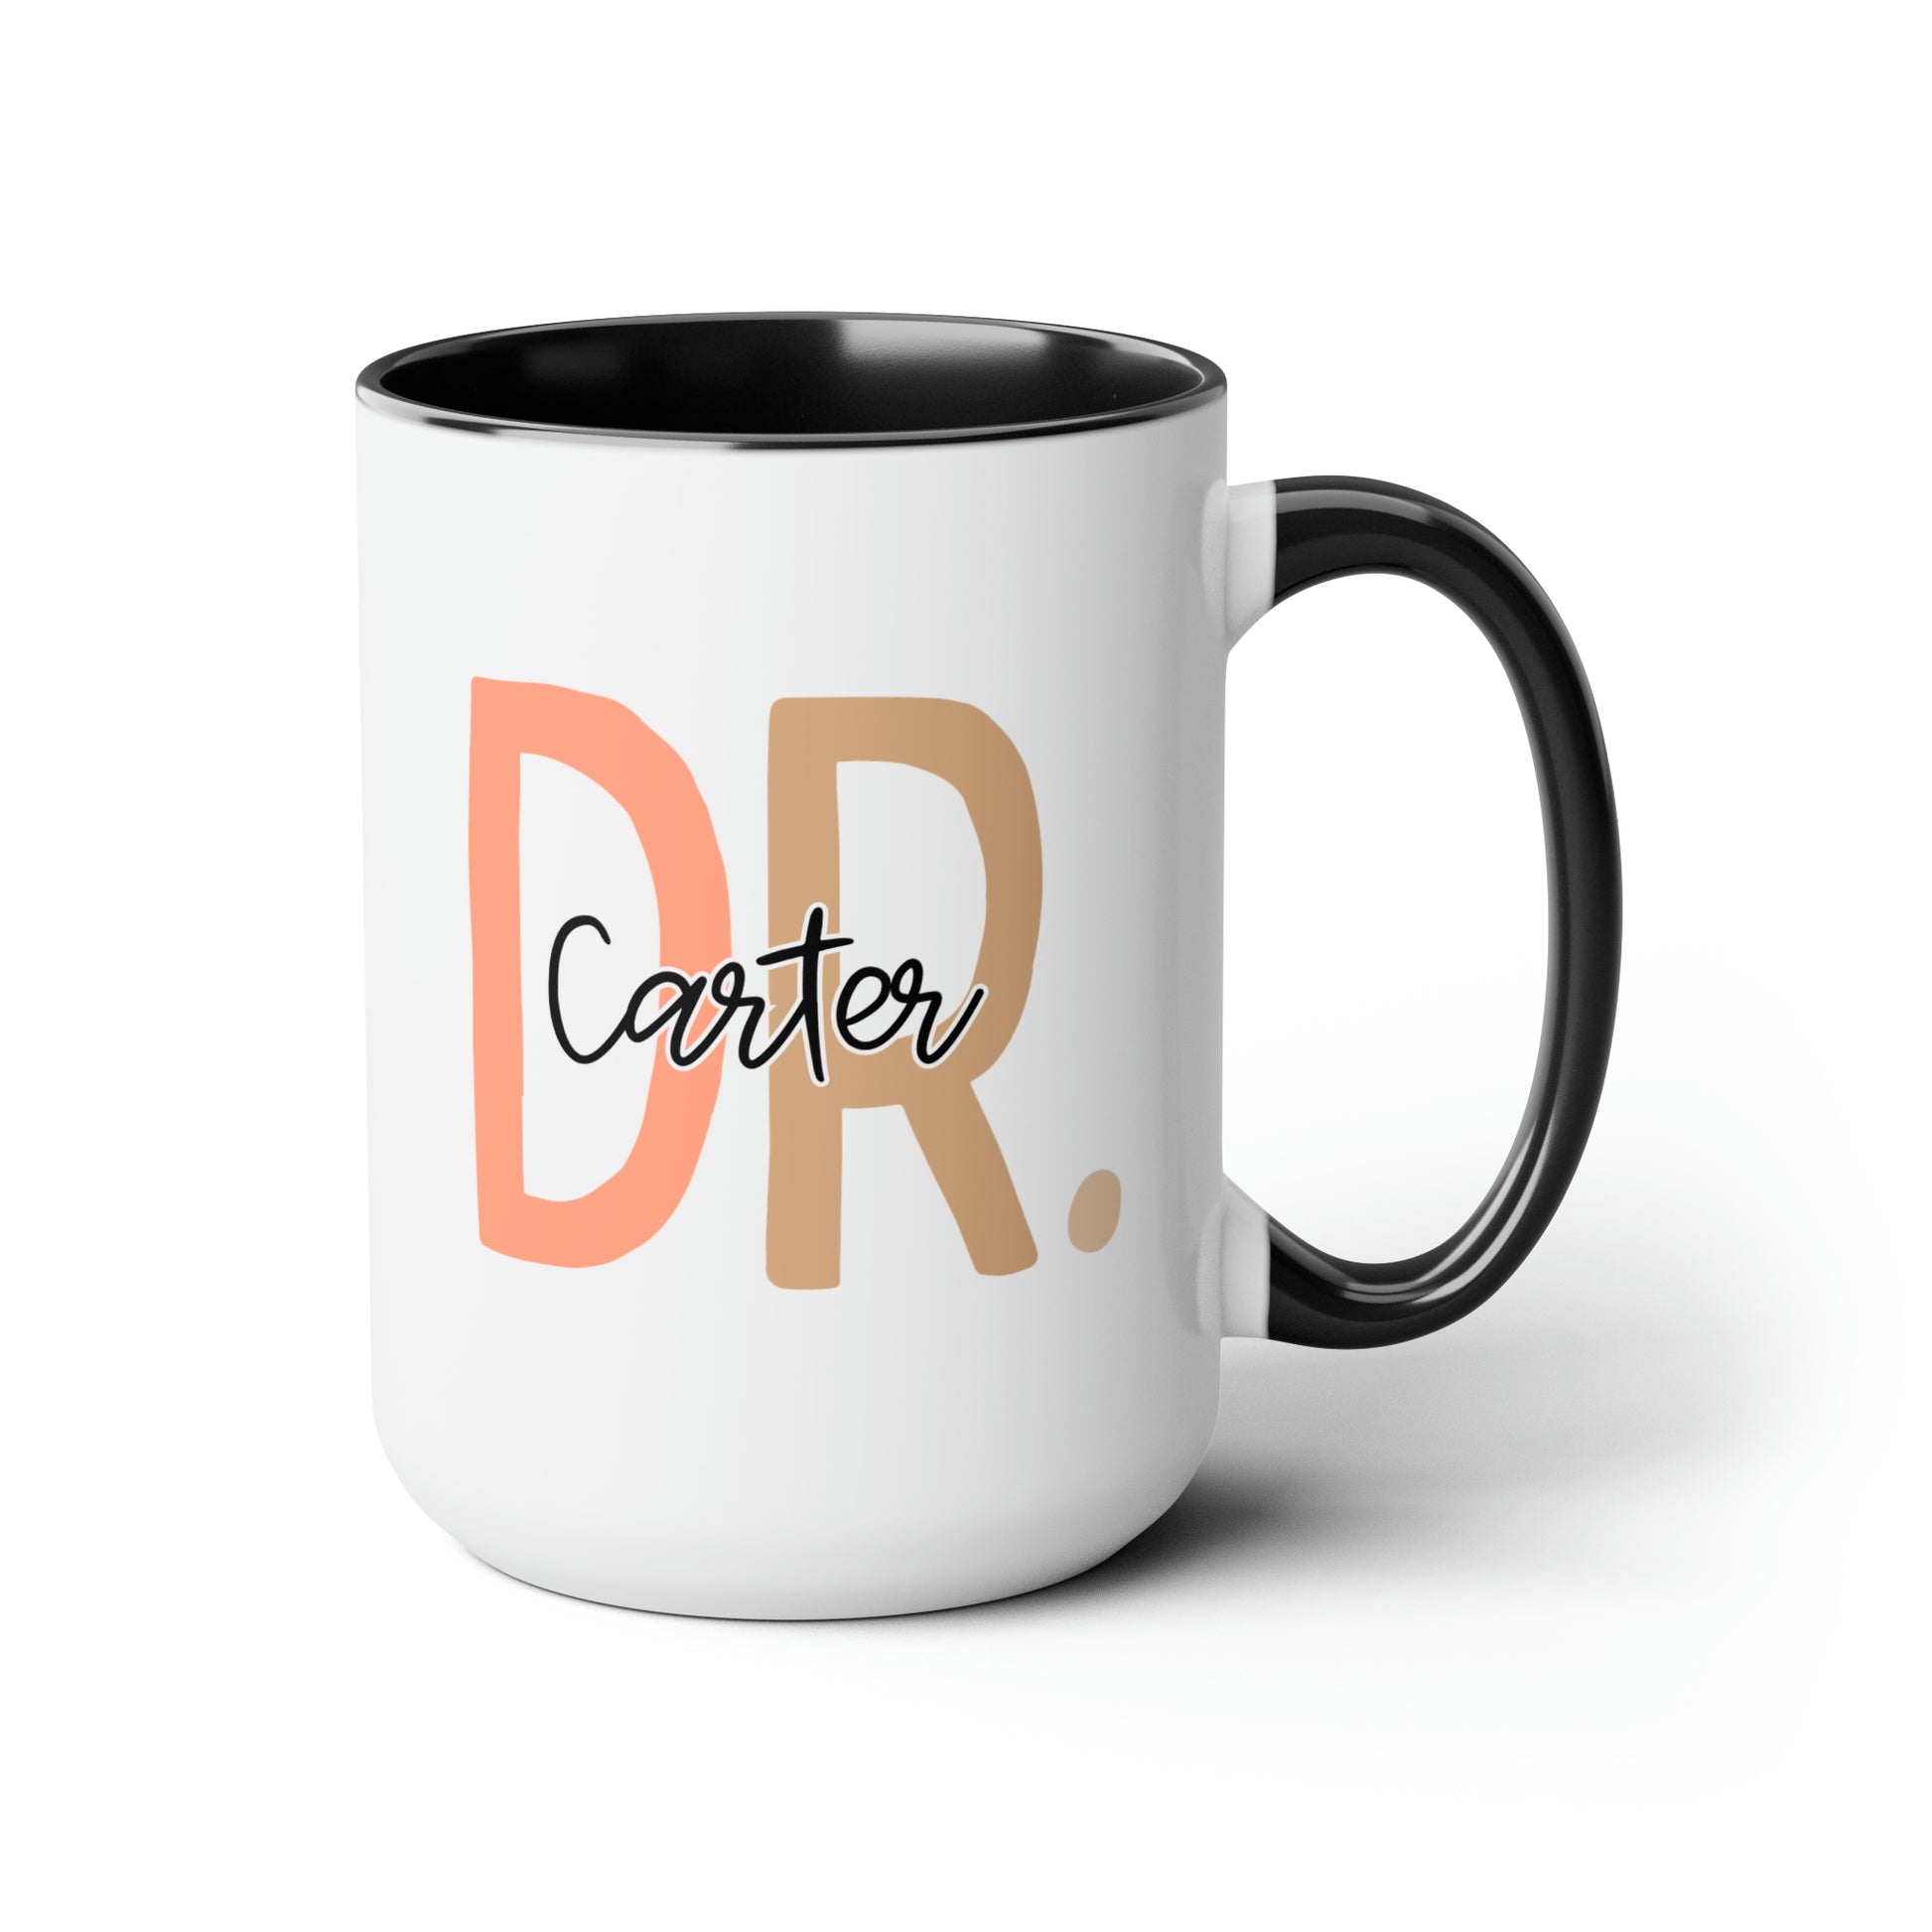 Dr Name 15oz white with black accent funny large coffee mug gift for new doctor medical student PHD graduation doctorate waveywares wavey wares wavywares wavy wares